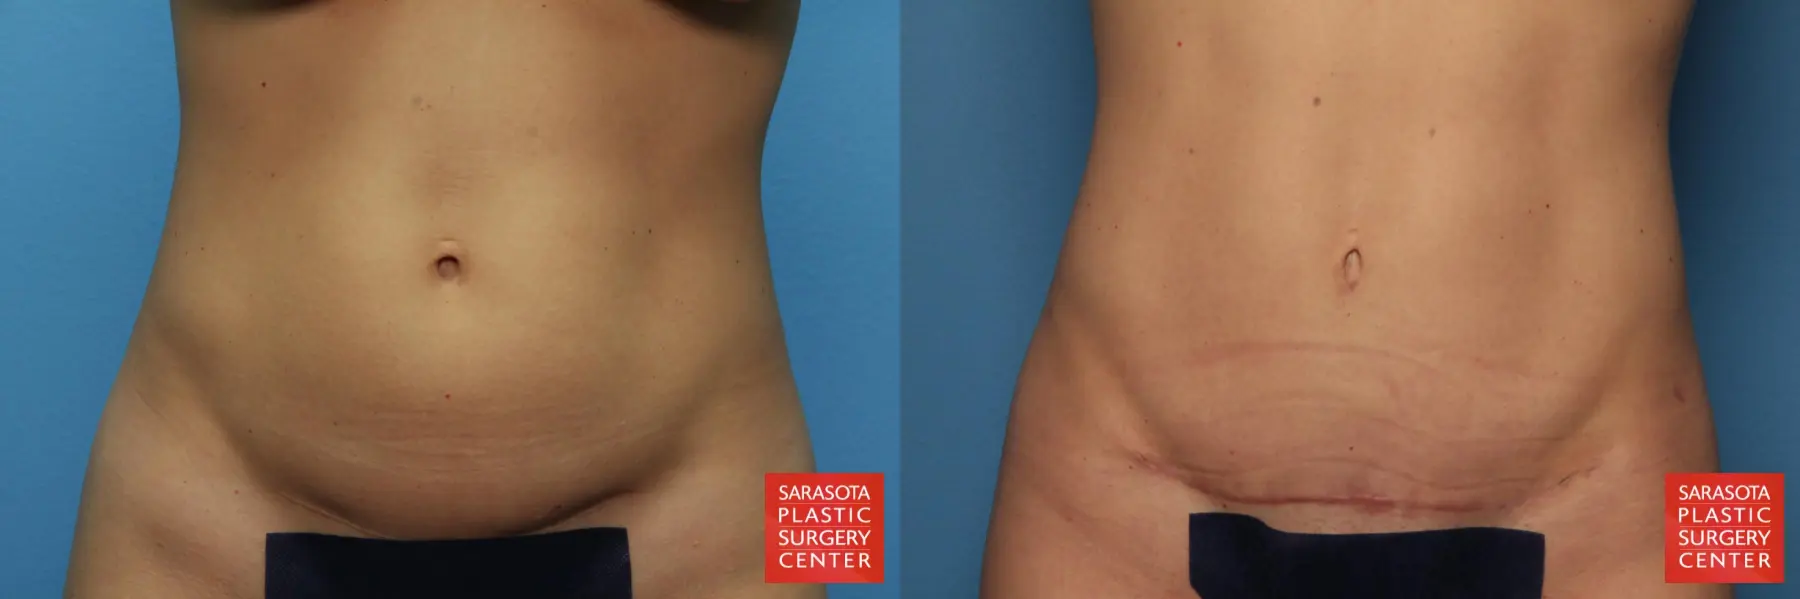 Lower Tummy Tuck : Patient 4 - Before and After  